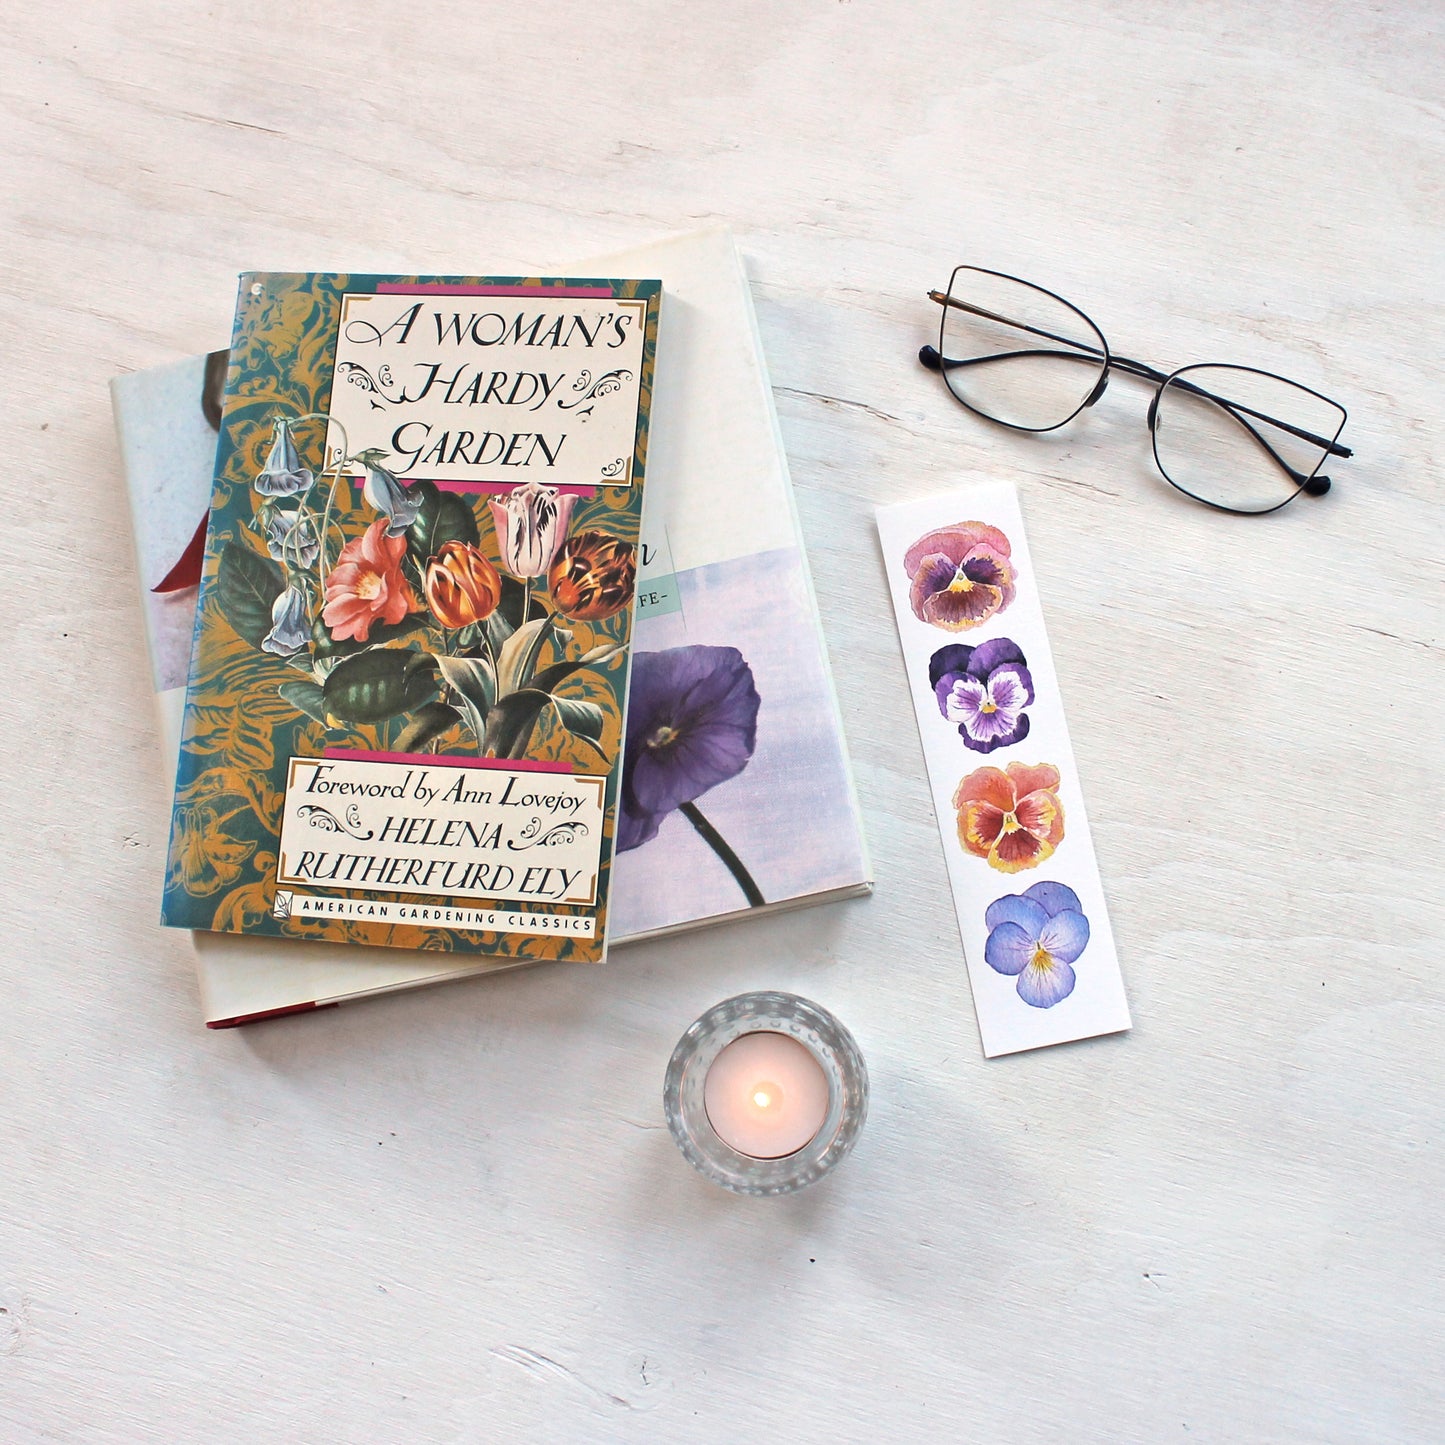 Paper bookmark featuring watercolor paintings of four pansies by Kathleen Maunder